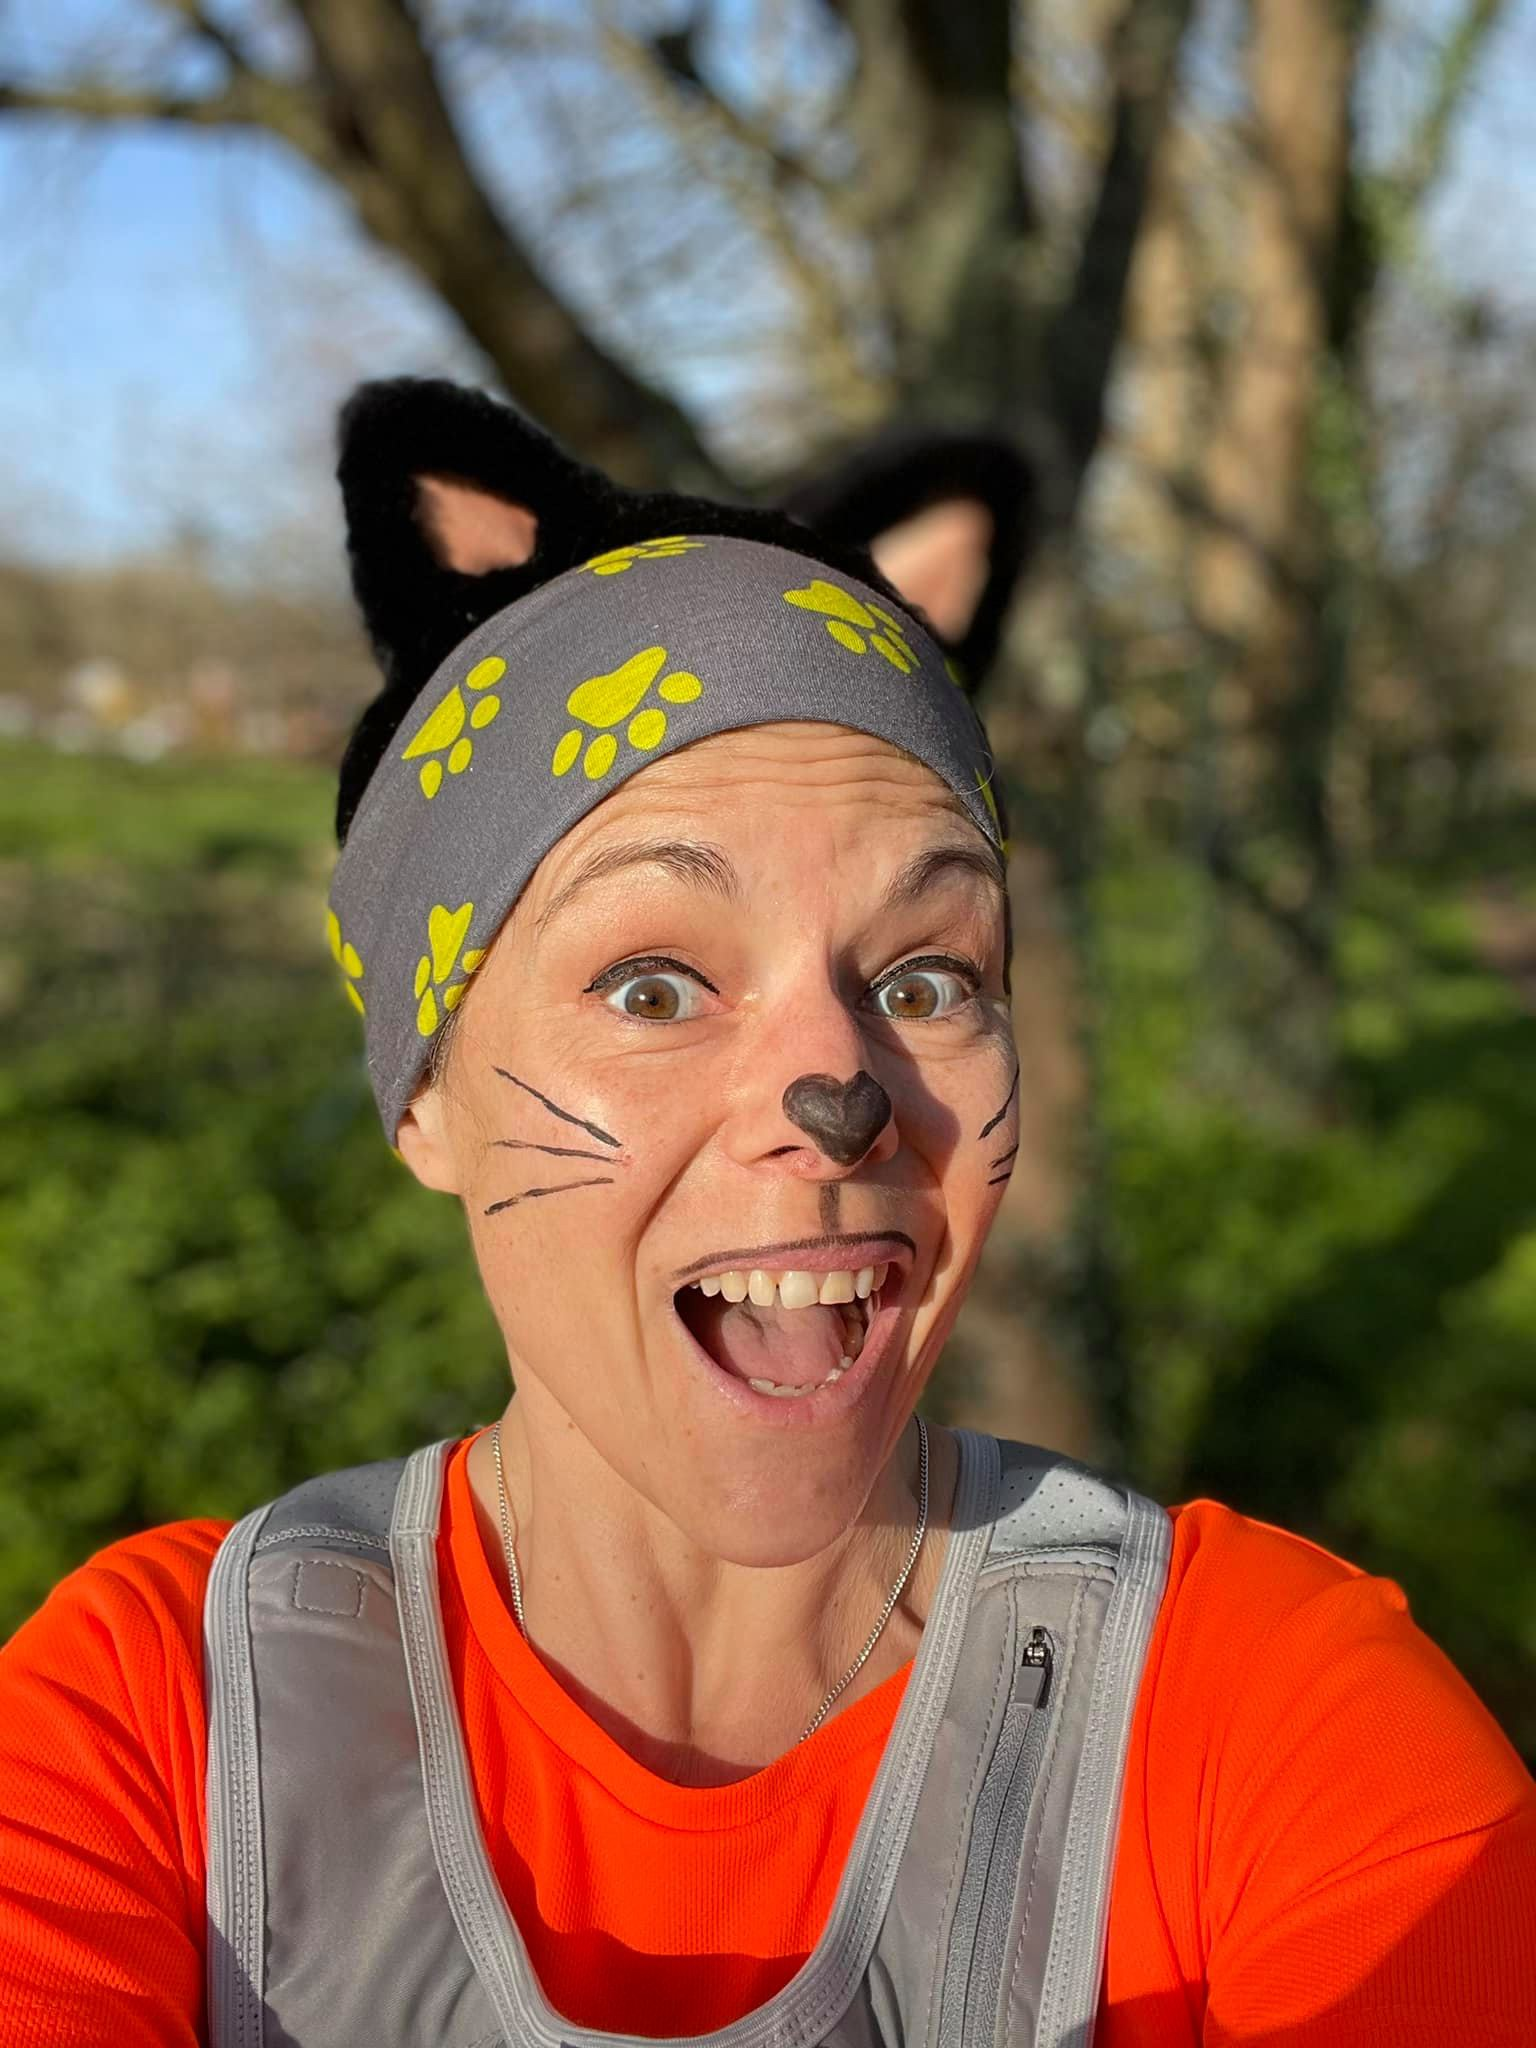 Register your own run for cats